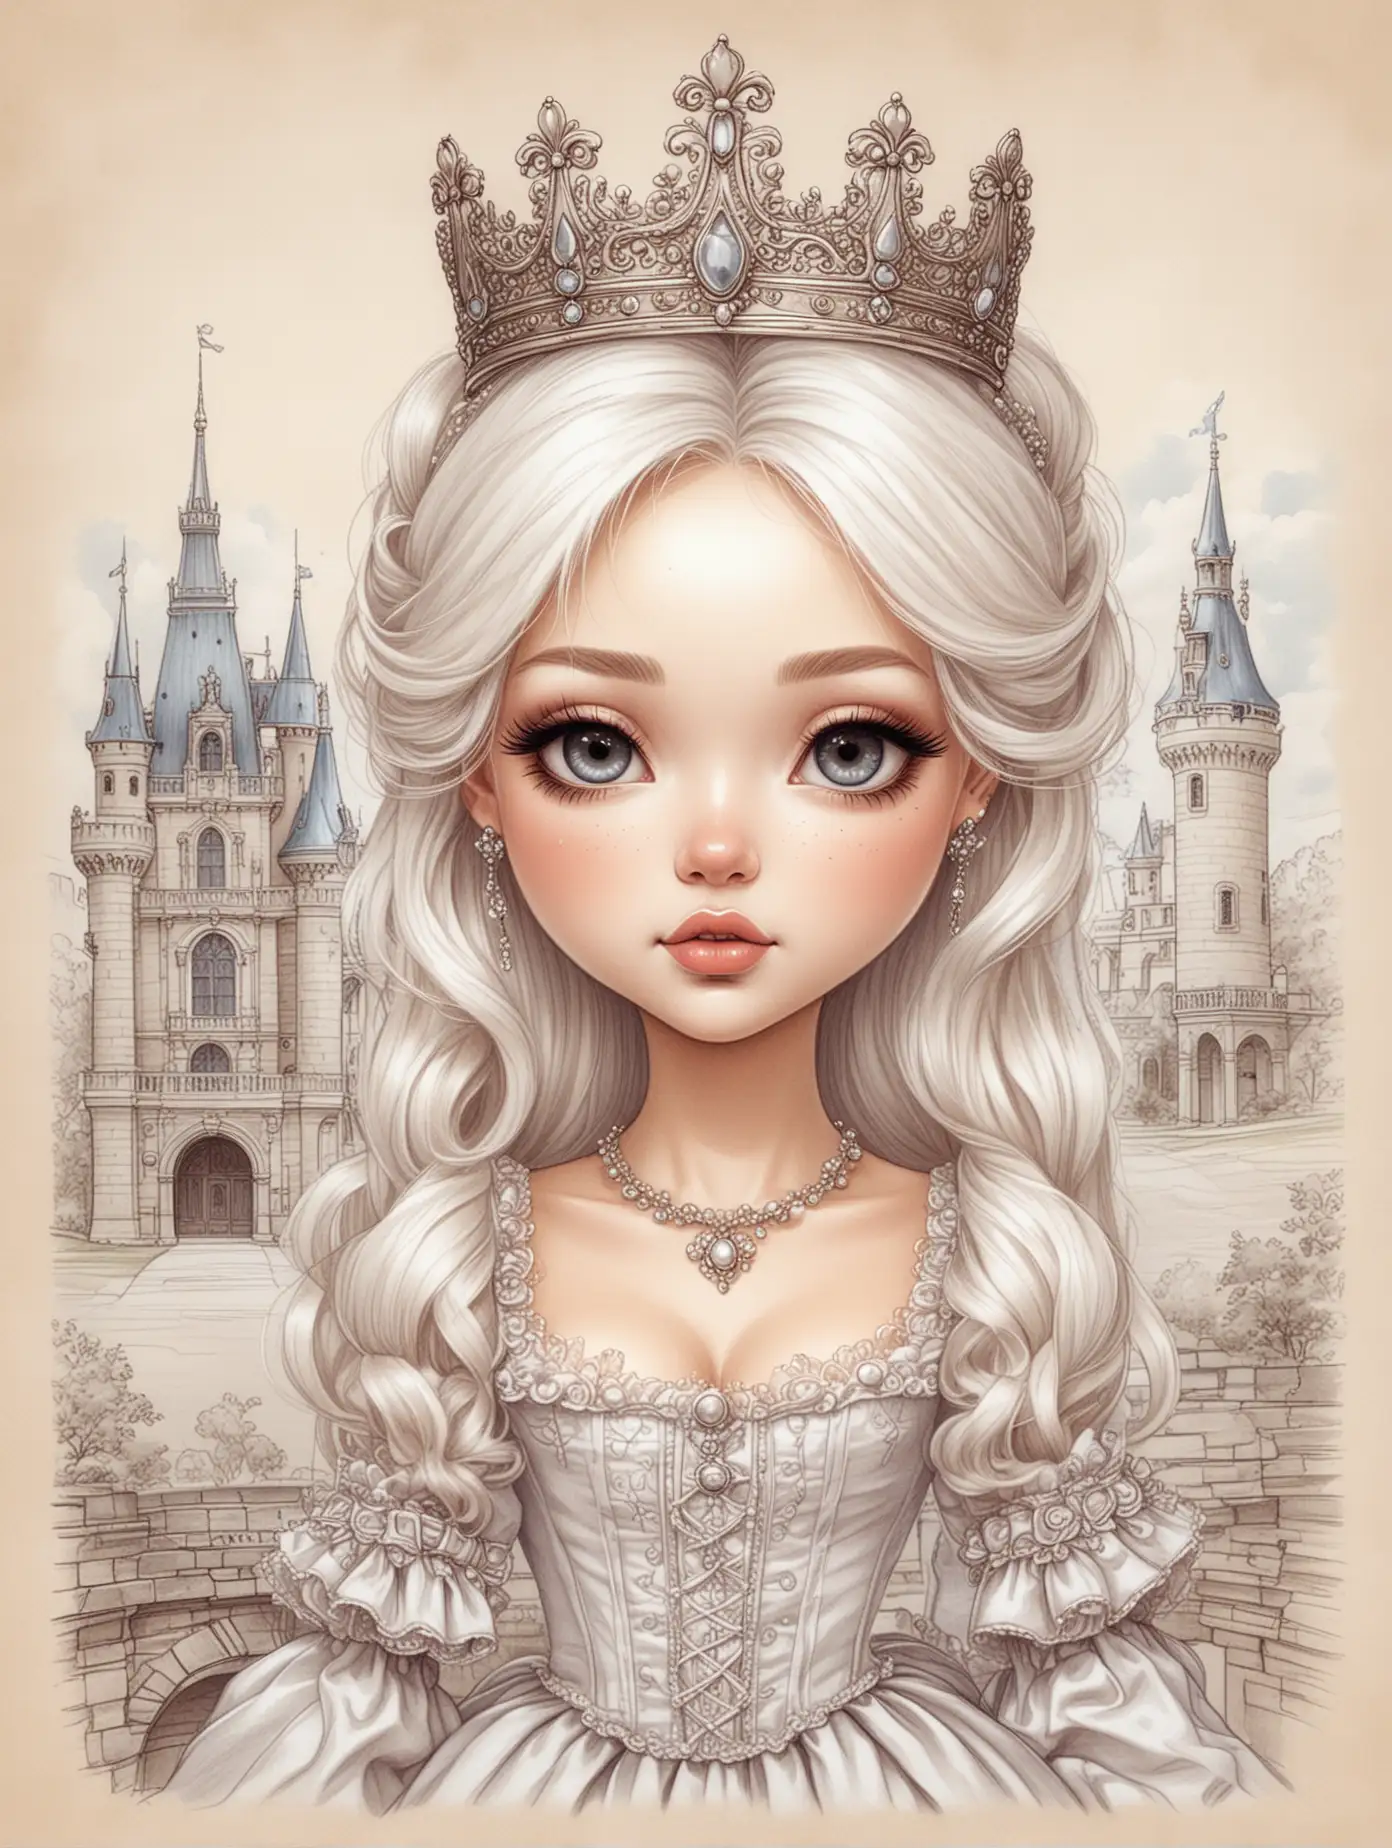 Elegant Chibi Woman in Marie Antoinette Outfit with Versailles Castle Background